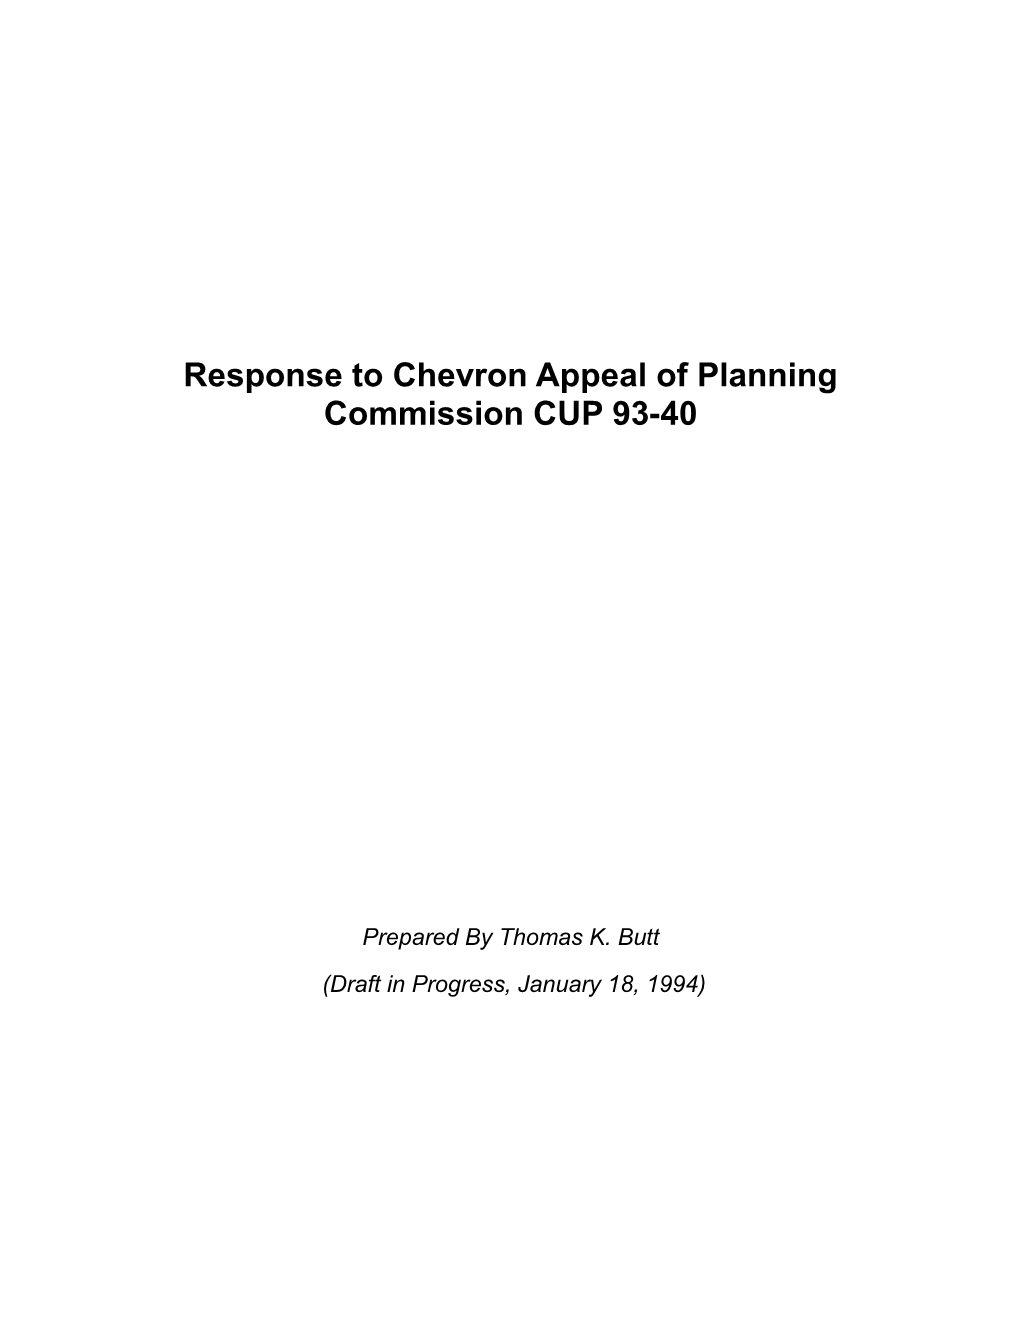 Response to Chevron Appeal of Planning Commission CUP 93-40